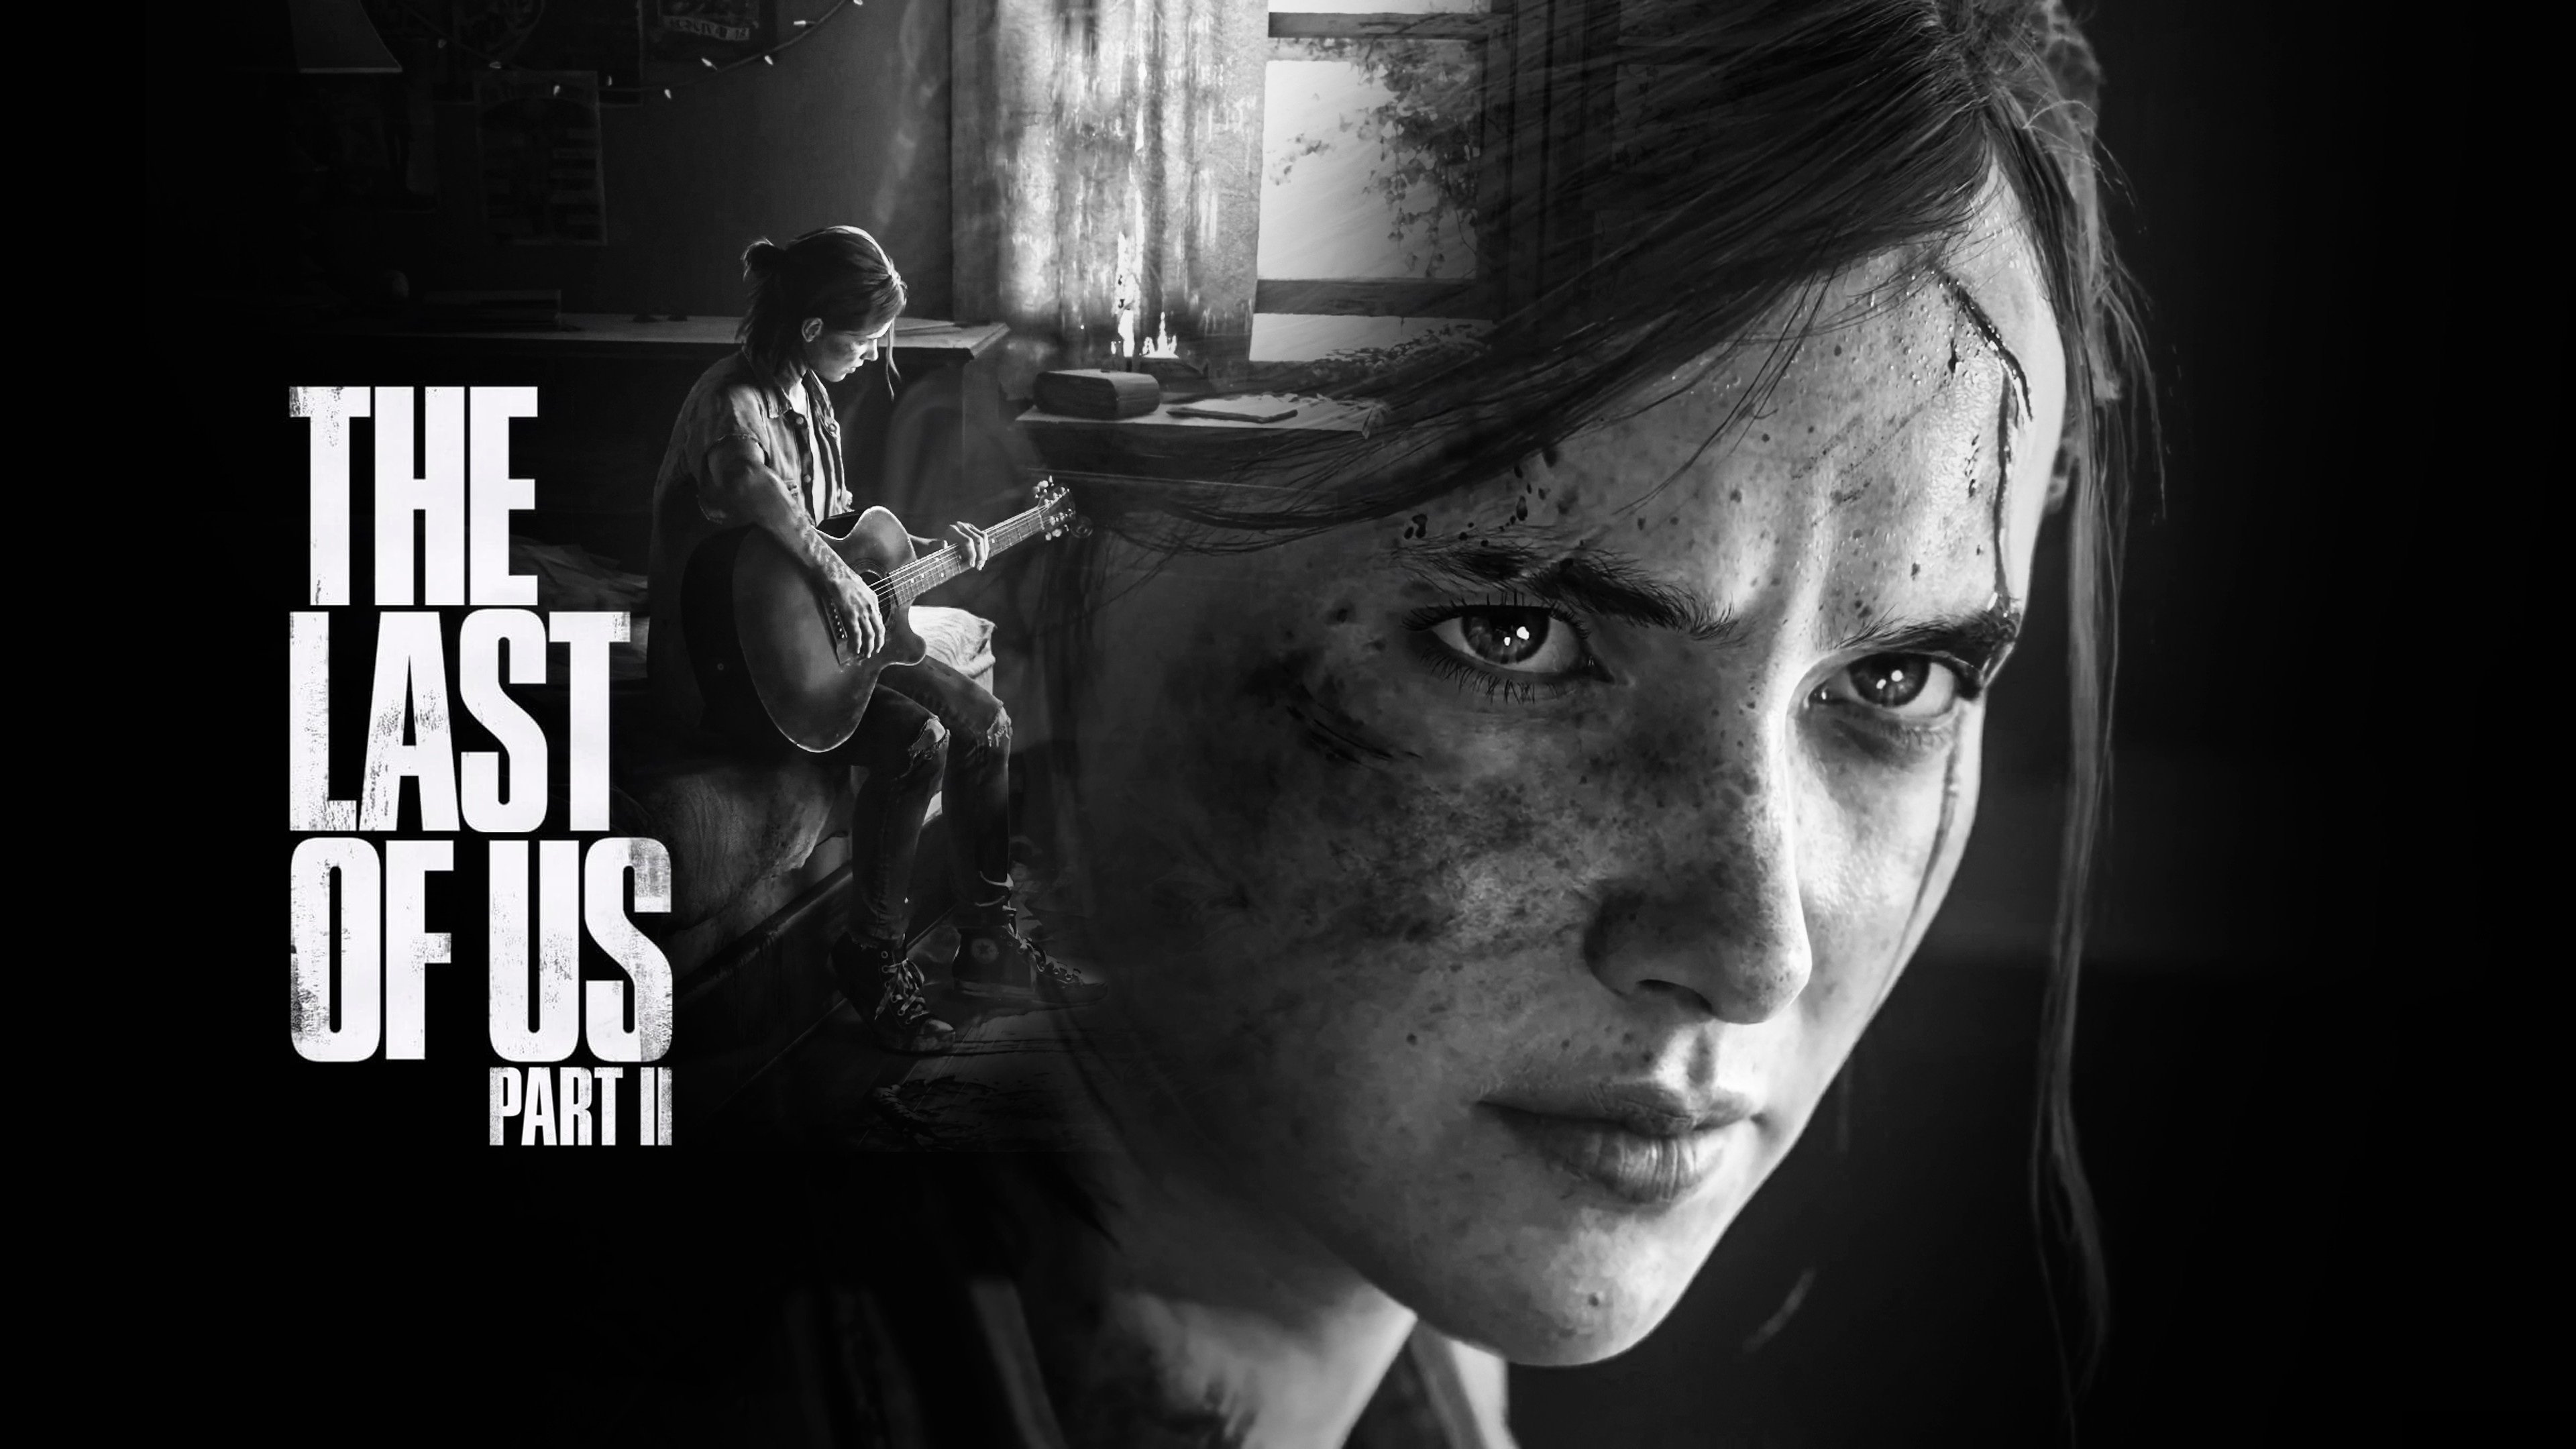 The Last of Us Part II HD Wallpaper and Background